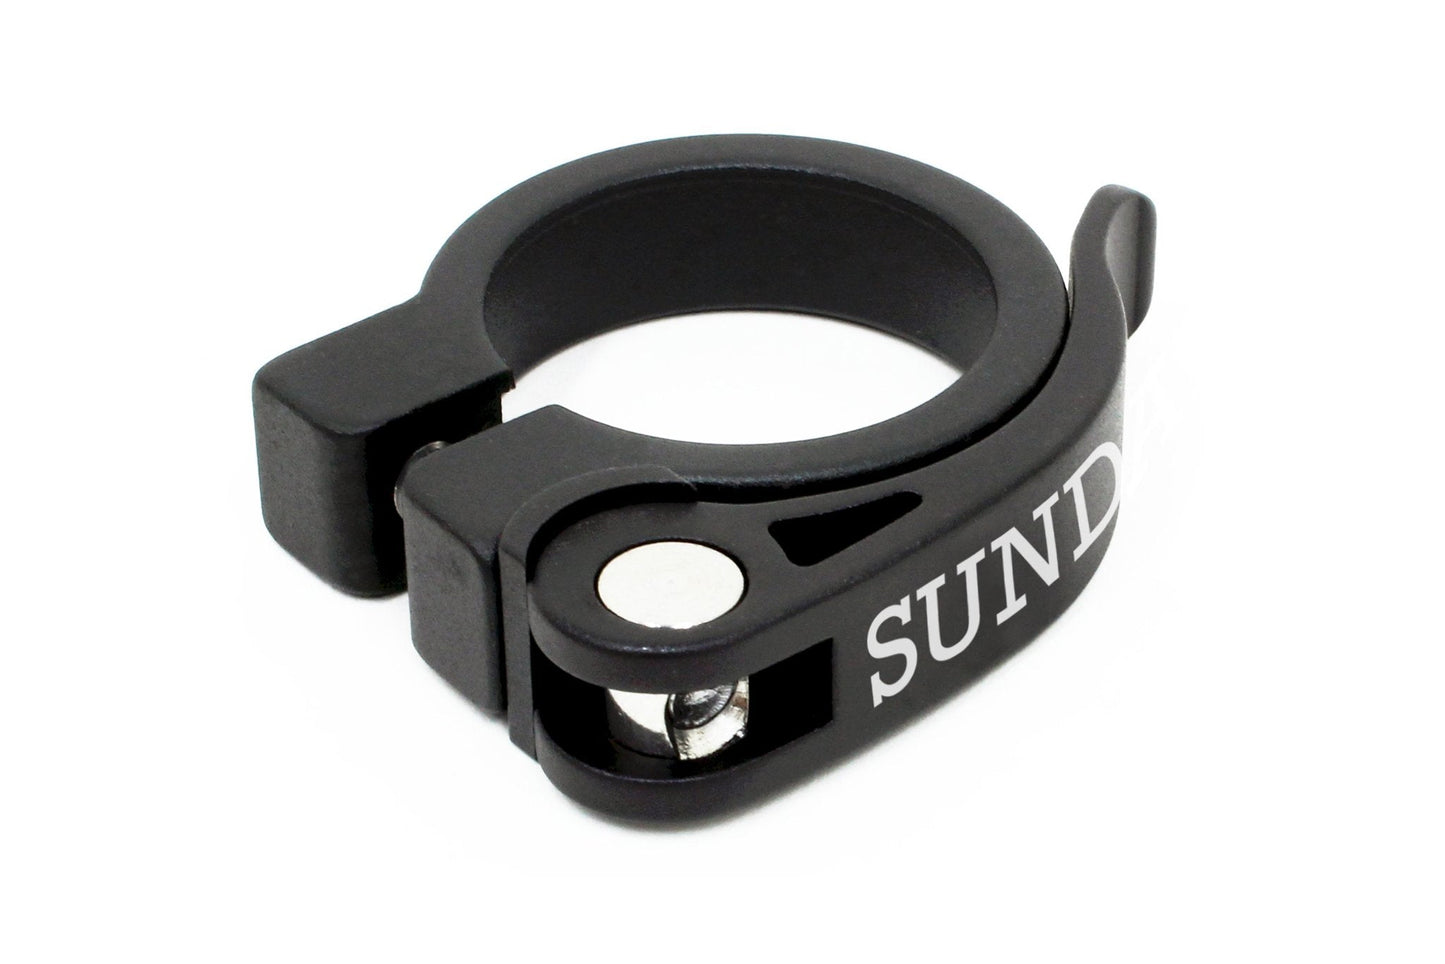 Sunday quick release Seat Clamp